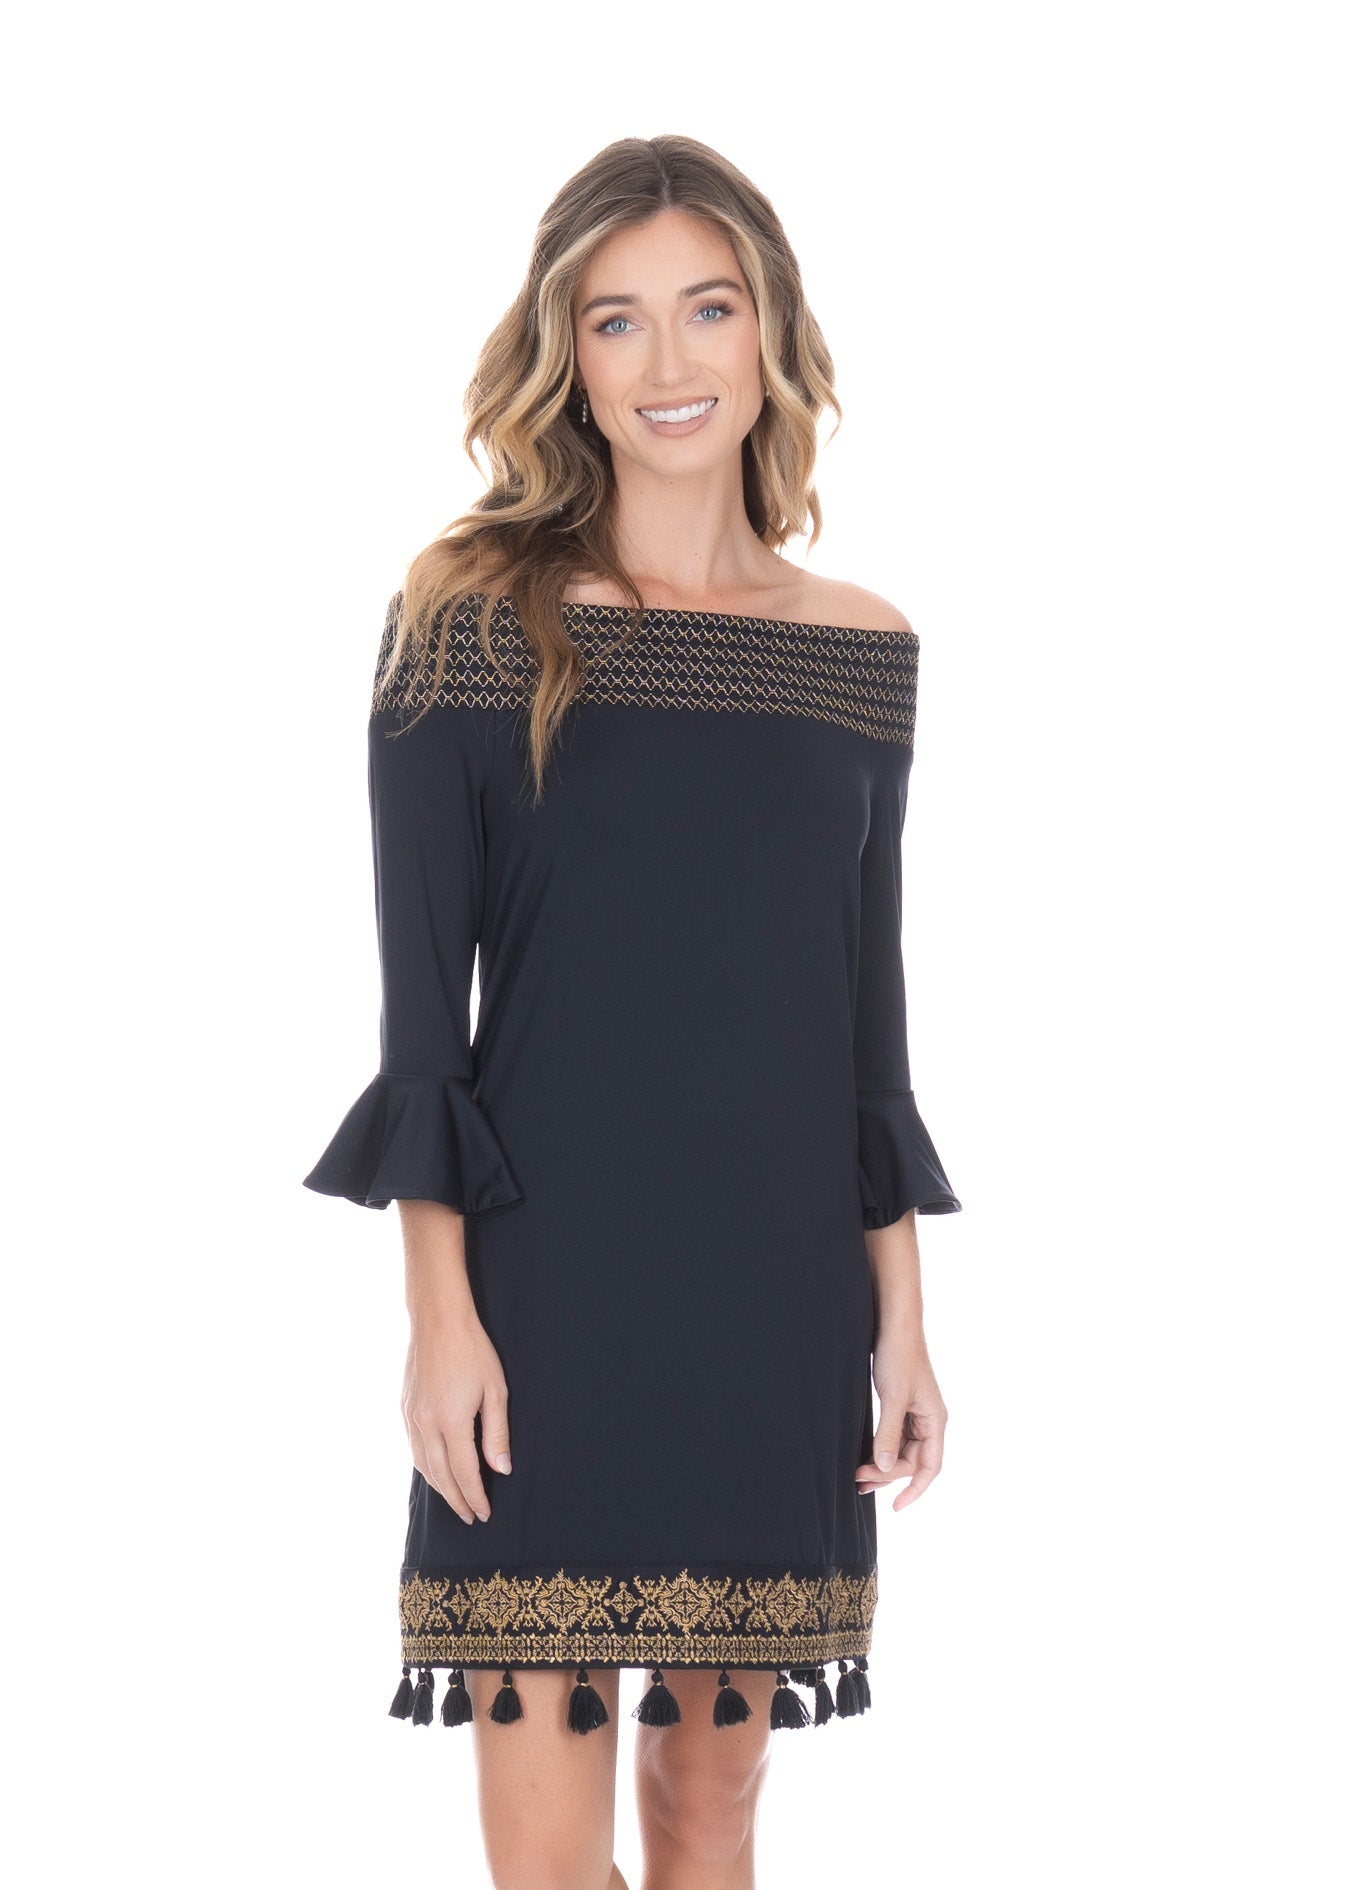 Blonde woman wearing the Black/Gold Metallic Embroidered Off The Shoulder Dress while smiling.